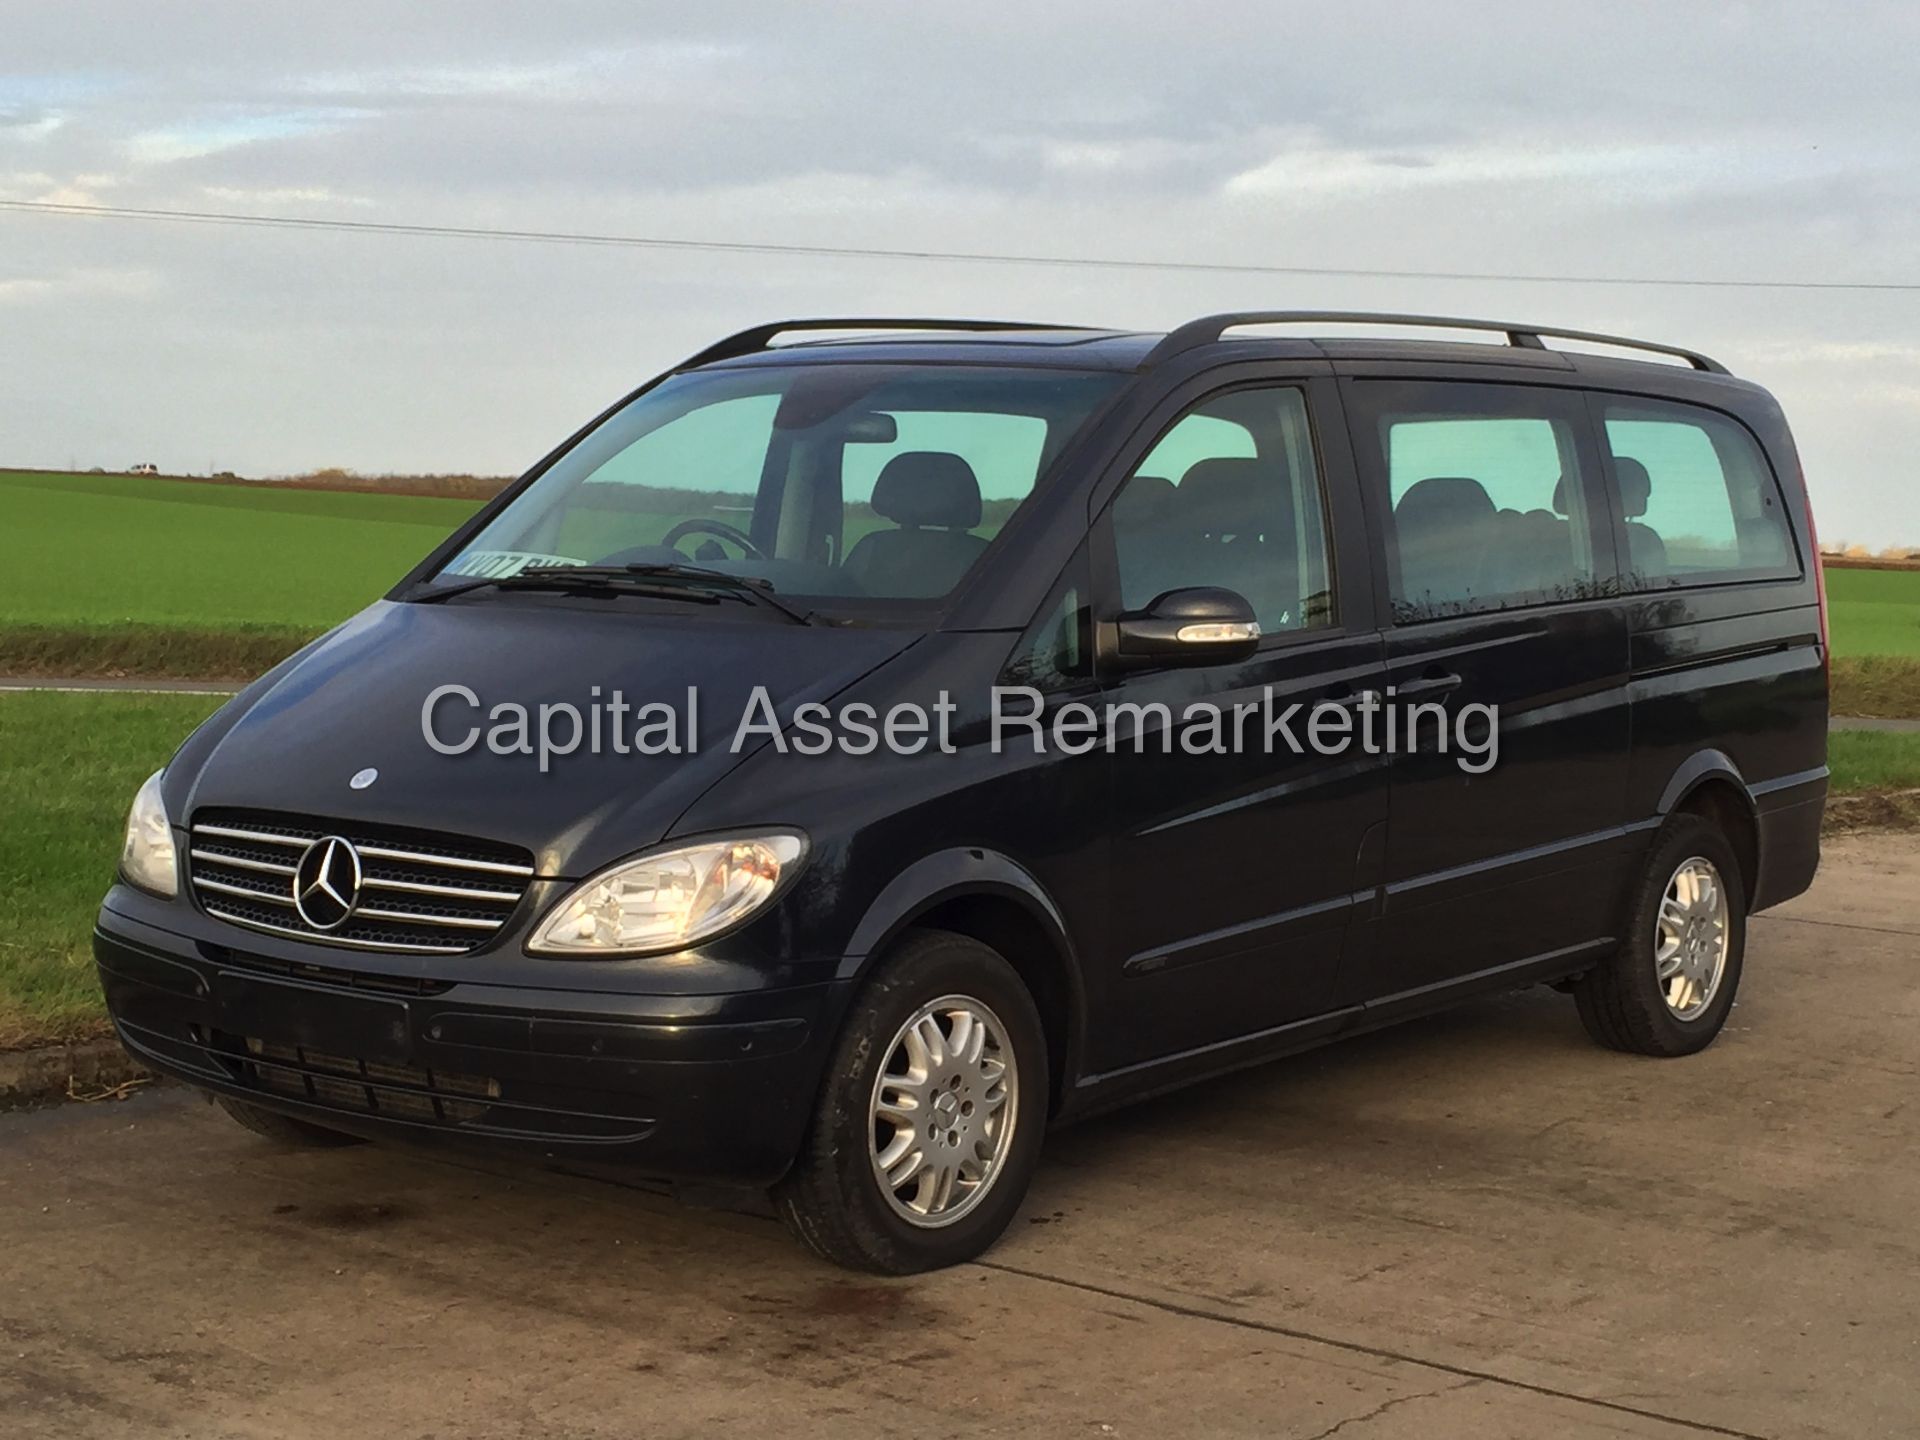 ON SALE ! MERCEDES VIANO 'AMBIENTE' 07 REG - 2.2 CDI -AUTO - LEATHER - SAT NAV-FULLY LOADED - NO VAT - Image 3 of 30